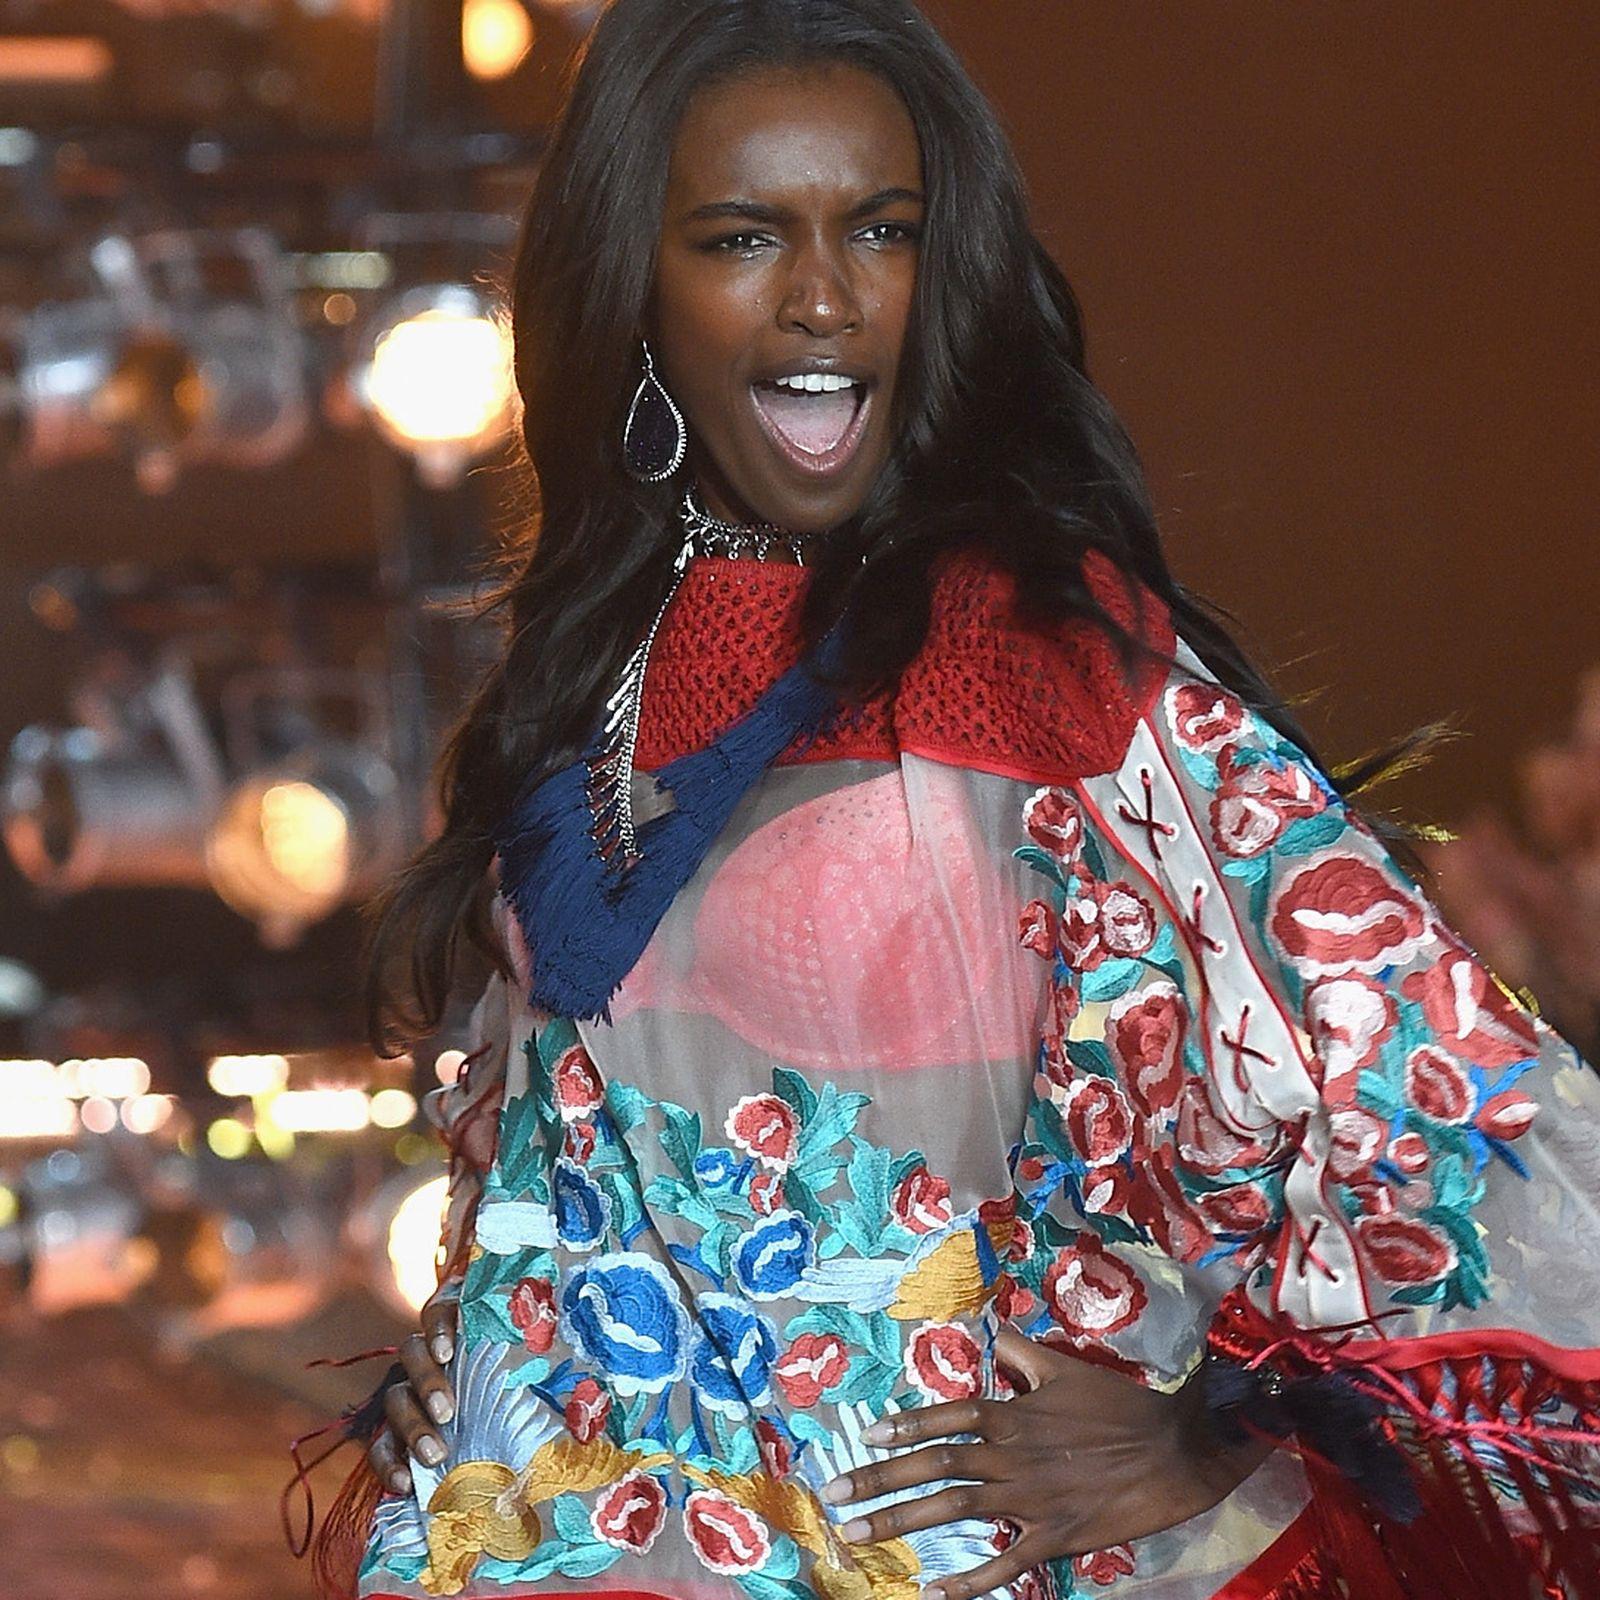 Model Leomie Anderson Wrote a Powerful Letter About the Importance